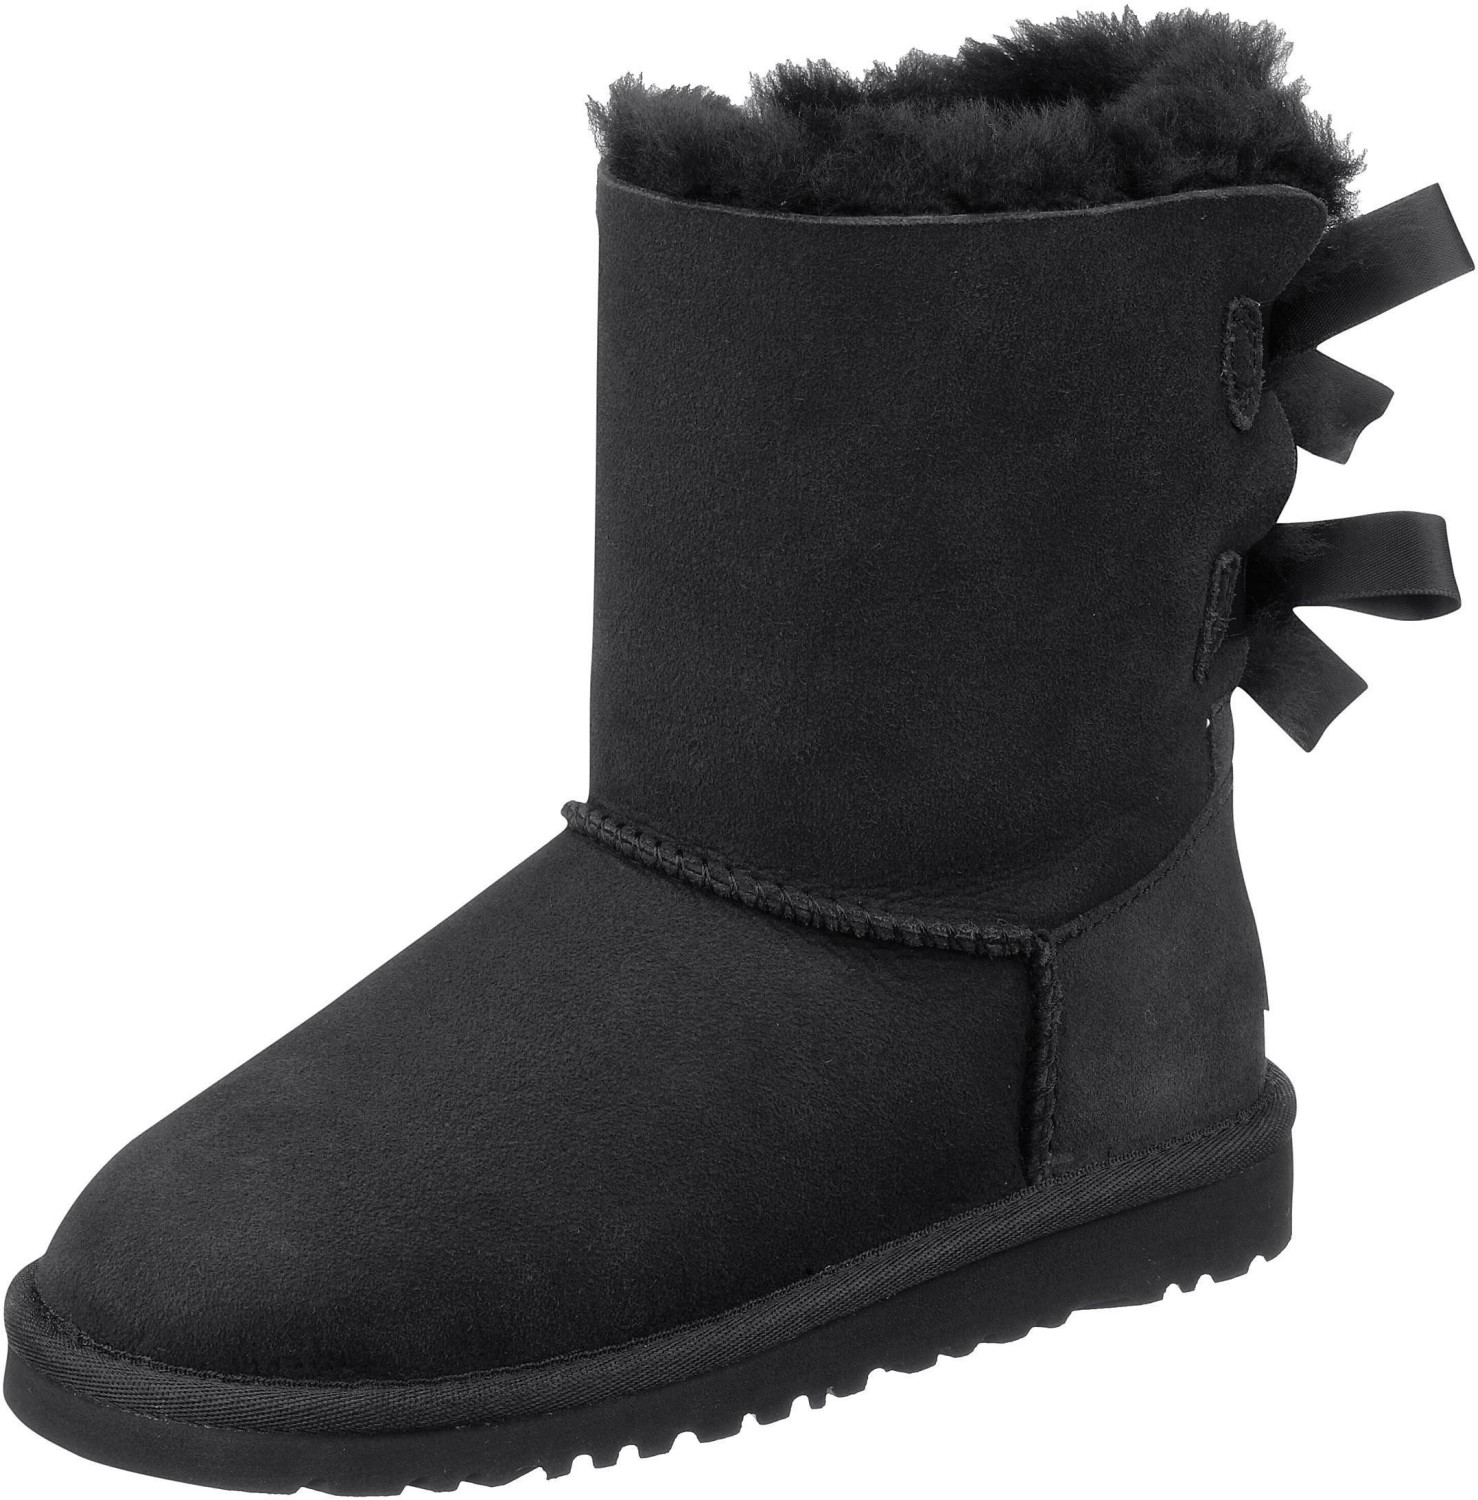 Buy UGG Bailey Bow II Black from £184.99 (Today) – January sales on ...